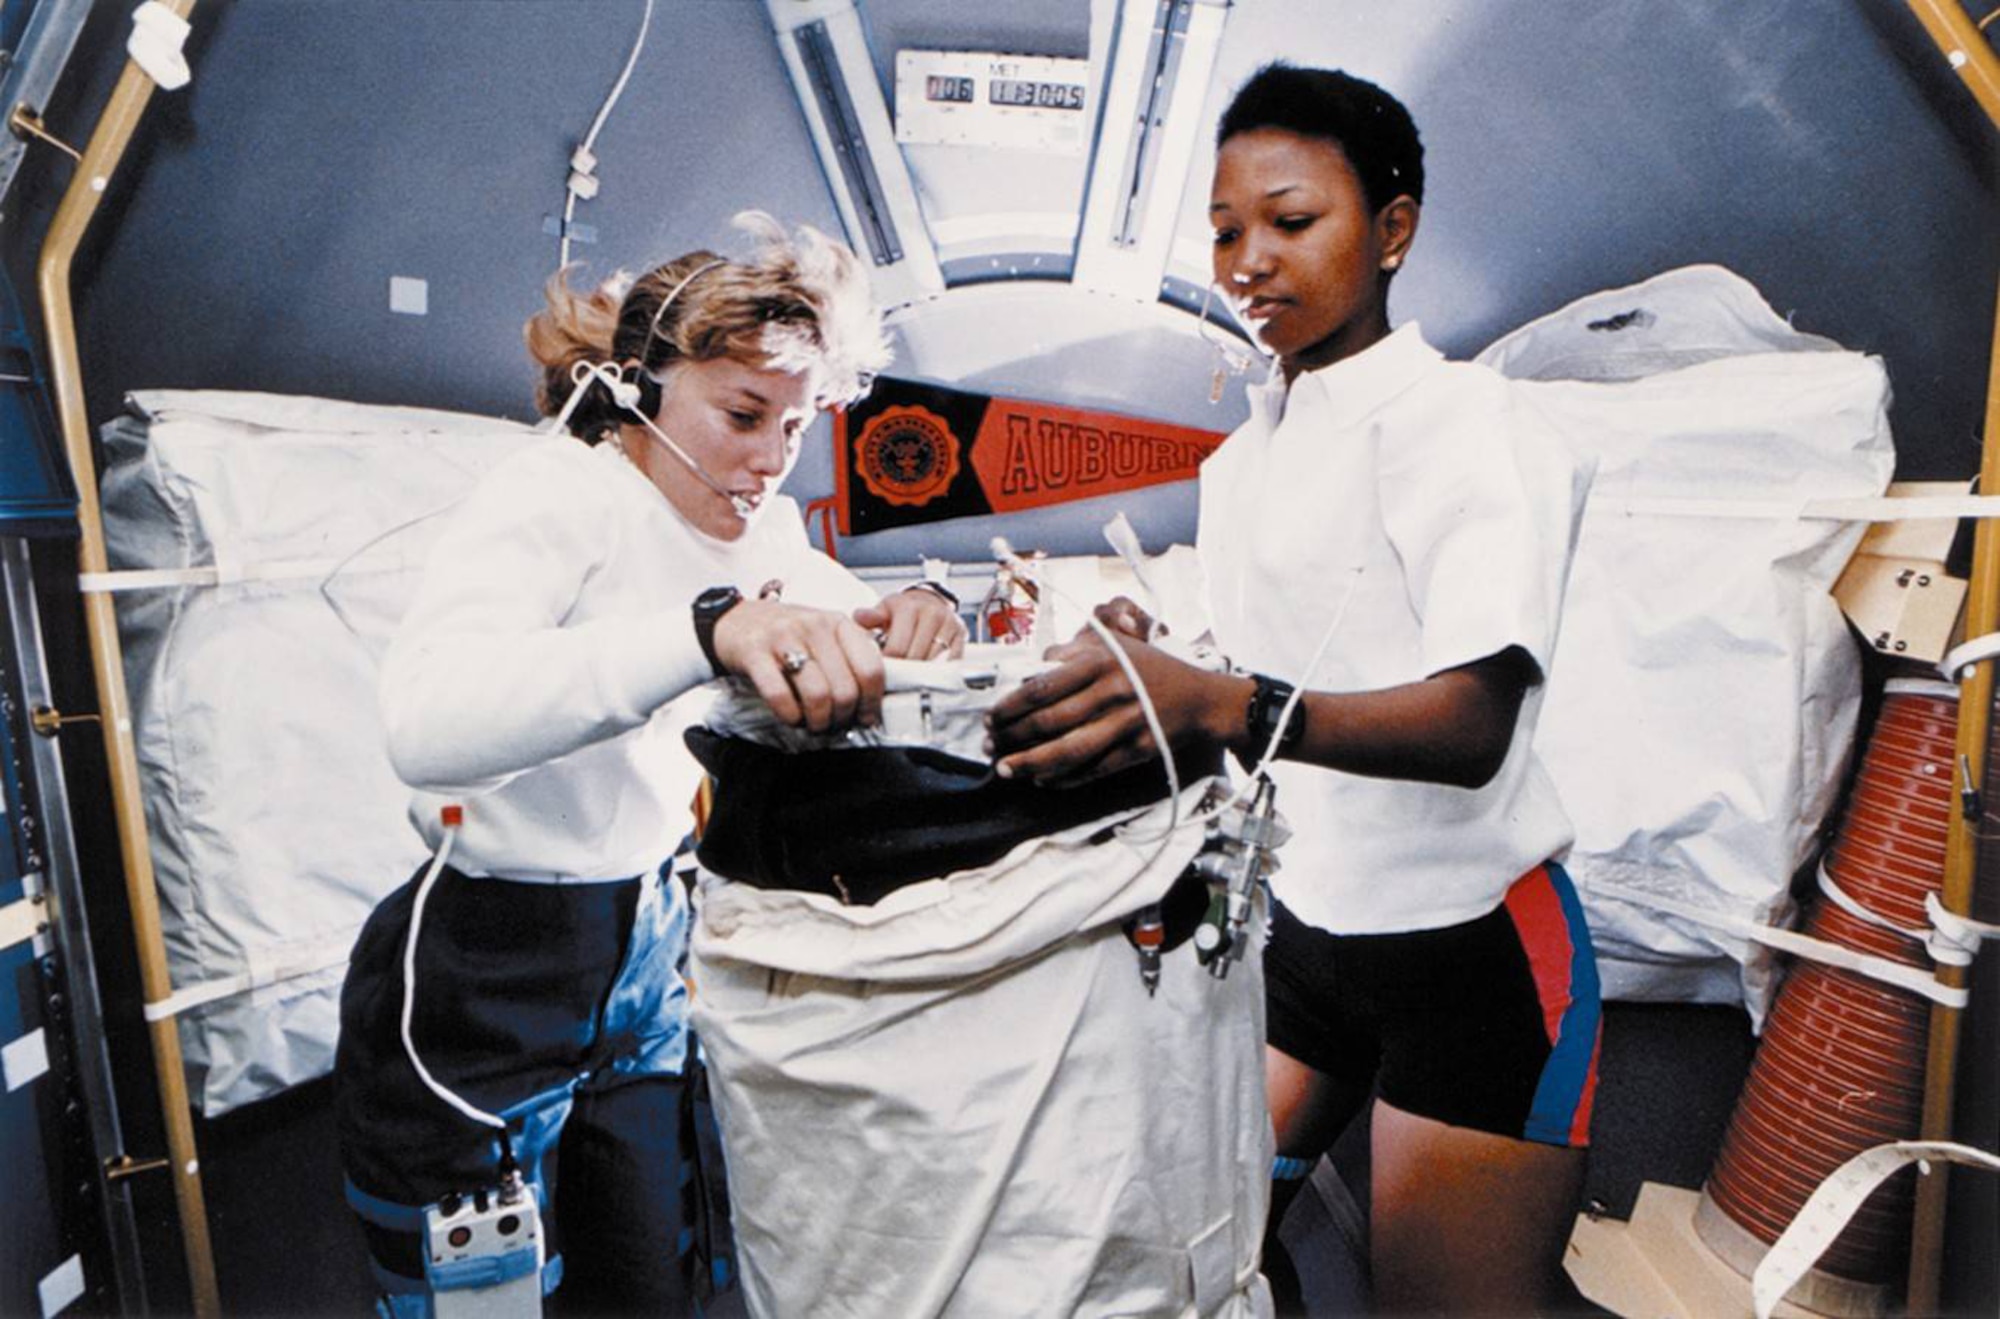 Dr. Mae Jemison was the first African-American woman to travel into space.